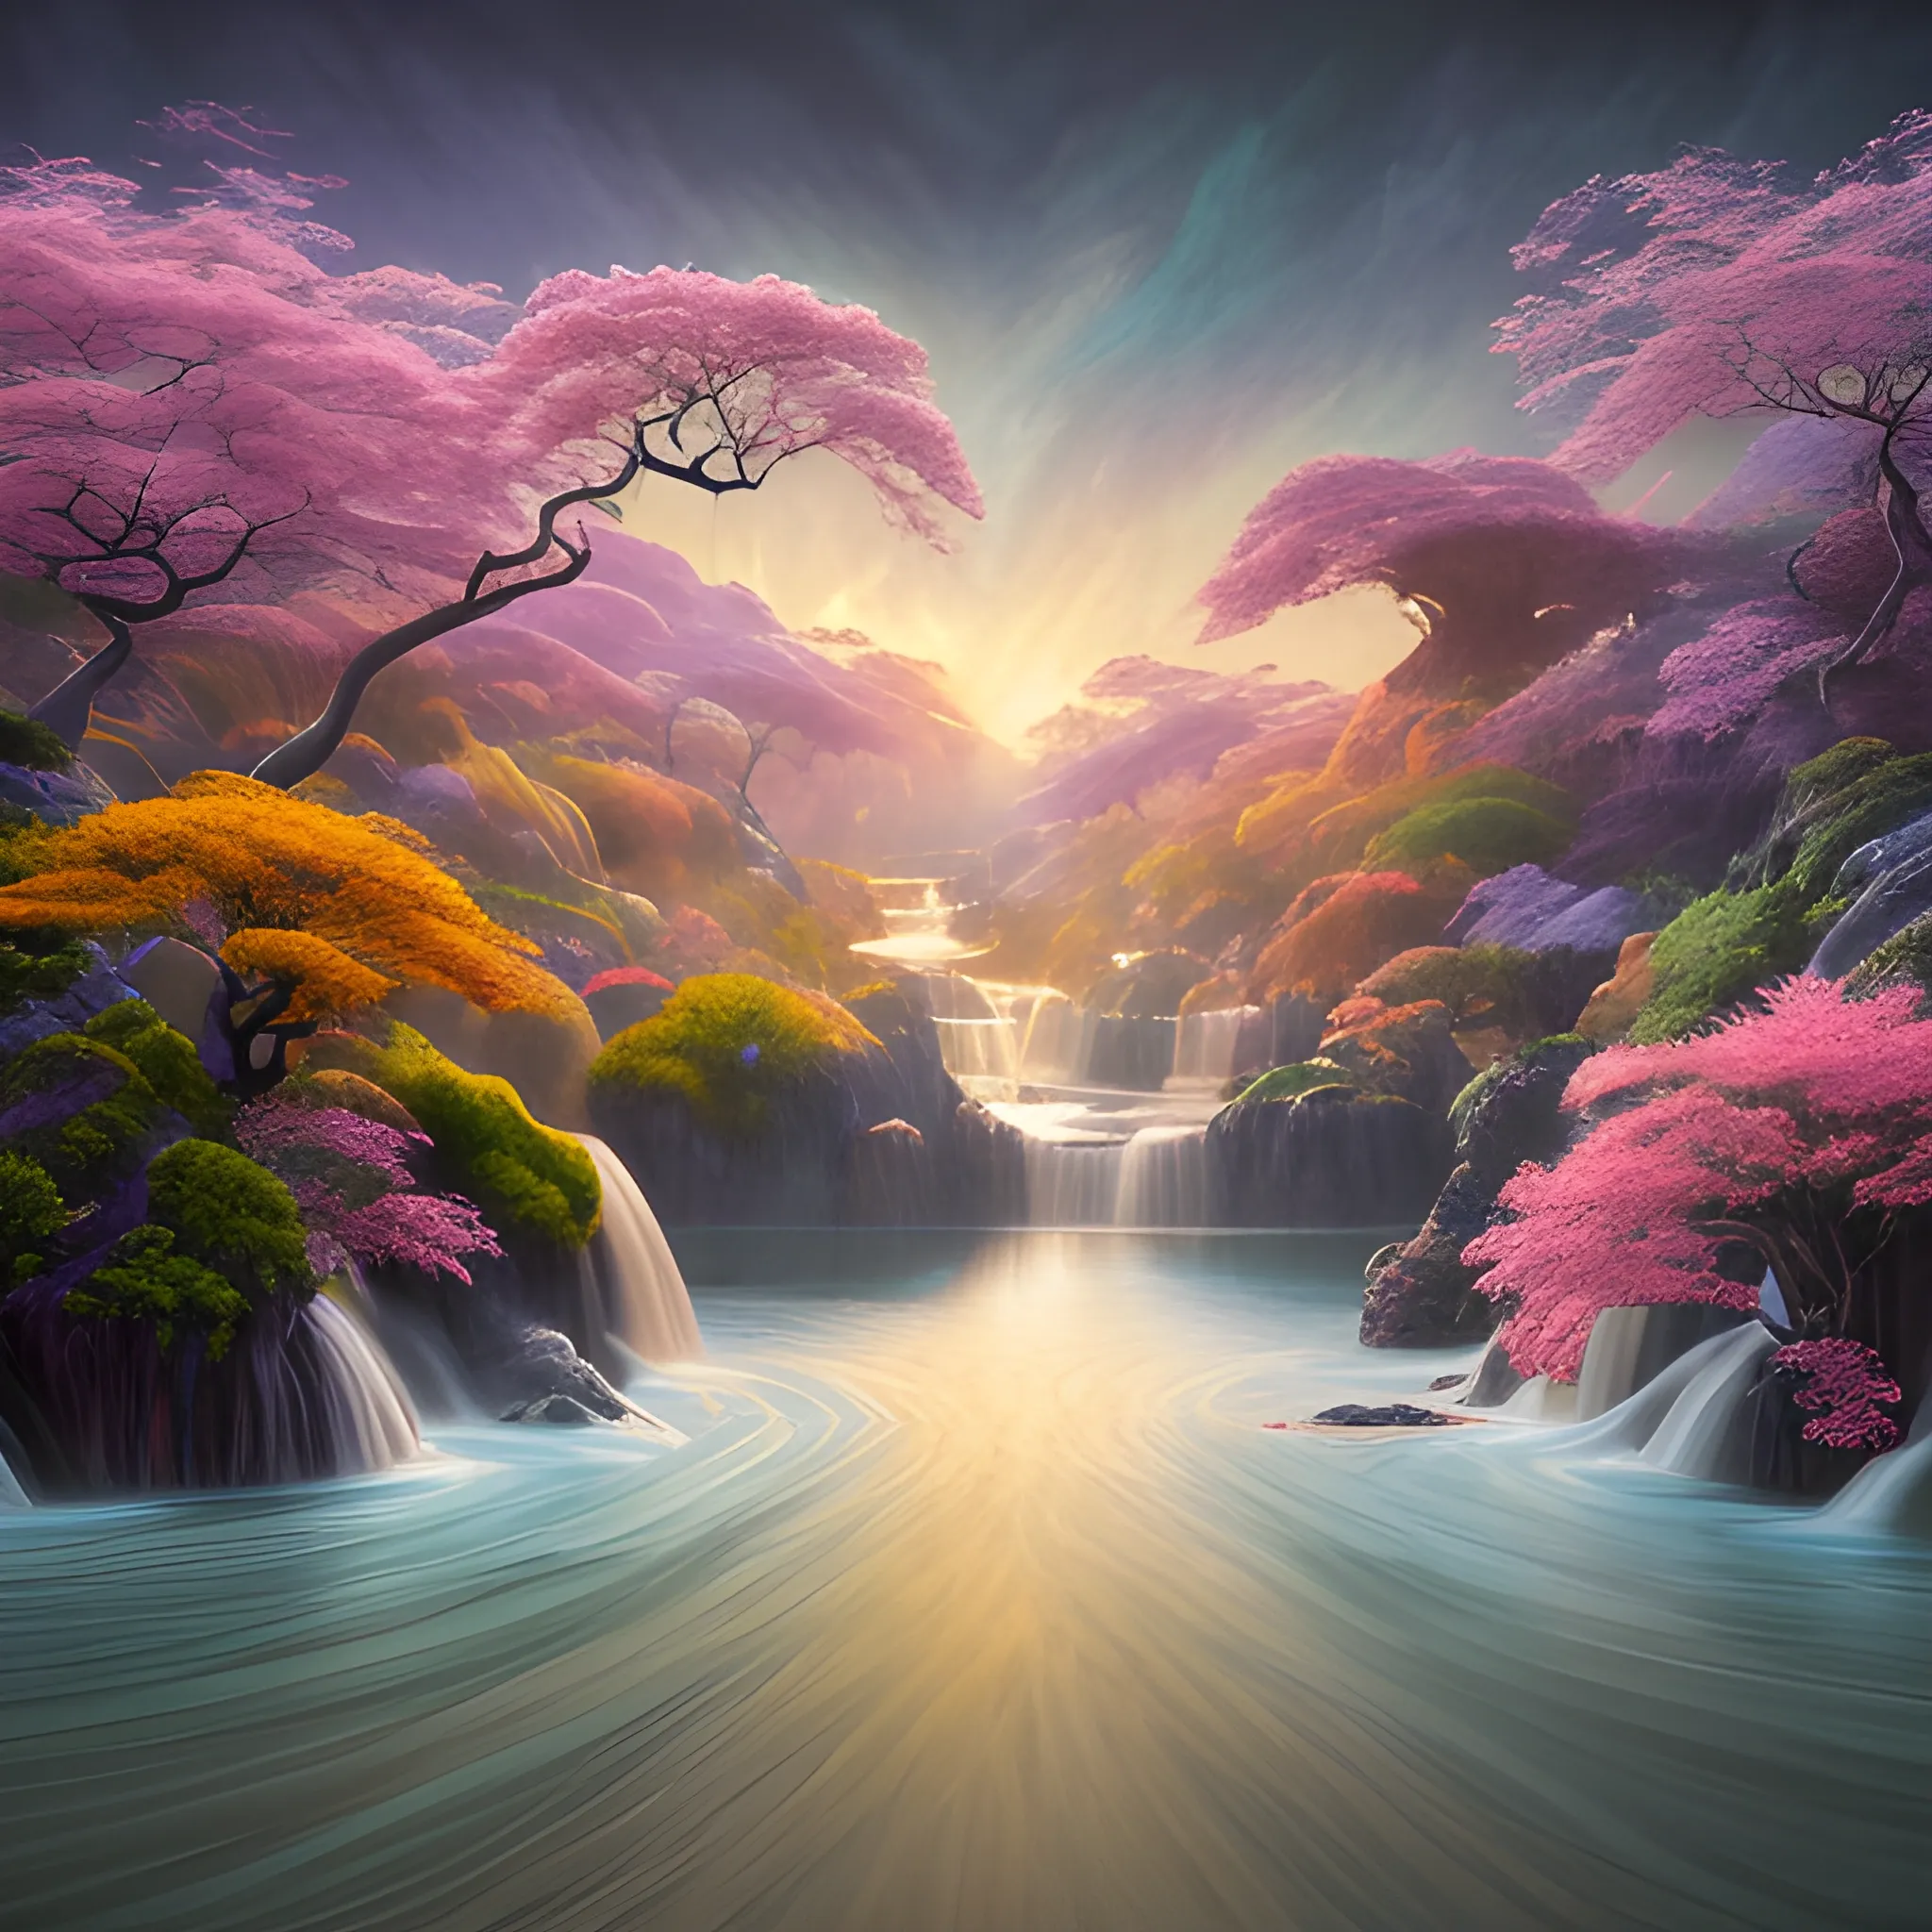 (by Ananta Mandal (and Andrew Biraj:0.5)), (in the style of nihonga), Style: Abstract, Medium: Digital illustration, Subject: An otherworldly landscape with floating islands, Guanyin Bodhisattva at the middle of picture, cascading waterfalls, and vibrant flora and fauna. Camera Angle: Overhead shot capturing the vastness and intricate details of the scene. The colors are saturated, and the lighting creates a warm and ethereal atmosphere. The painting is highly detailed, with every brushstroke capturing the complexity of the imaginary world., (high quality), (detailed), (masterpiece), (best quality), (highres), (extremely detailed), (8k), seed:792315689